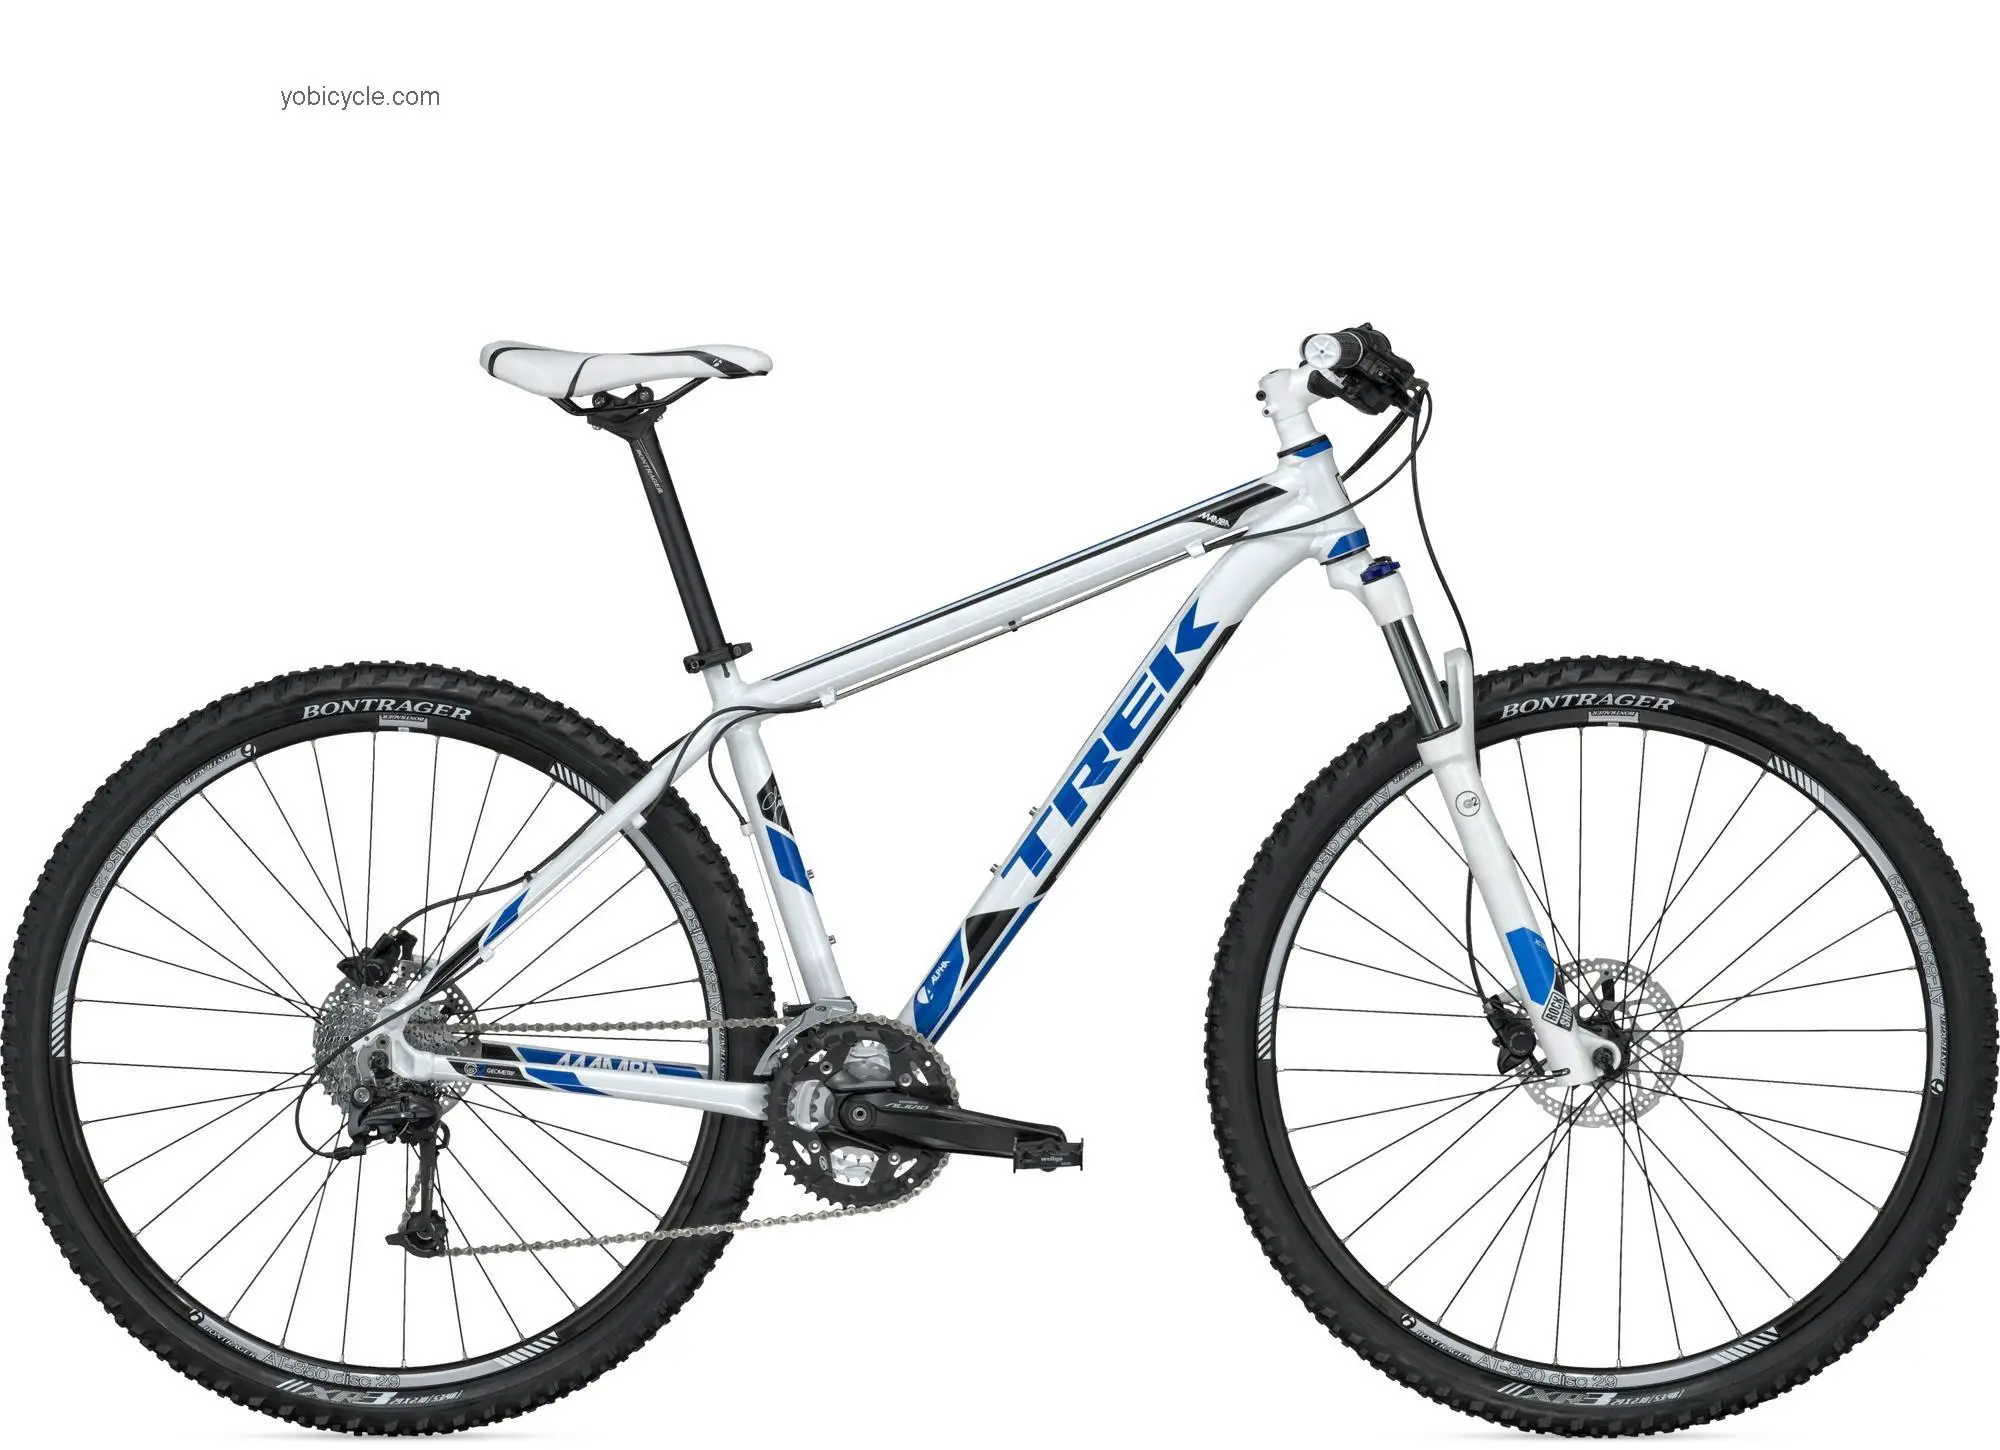 Trek Mamba competitors and comparison tool online specs and performance